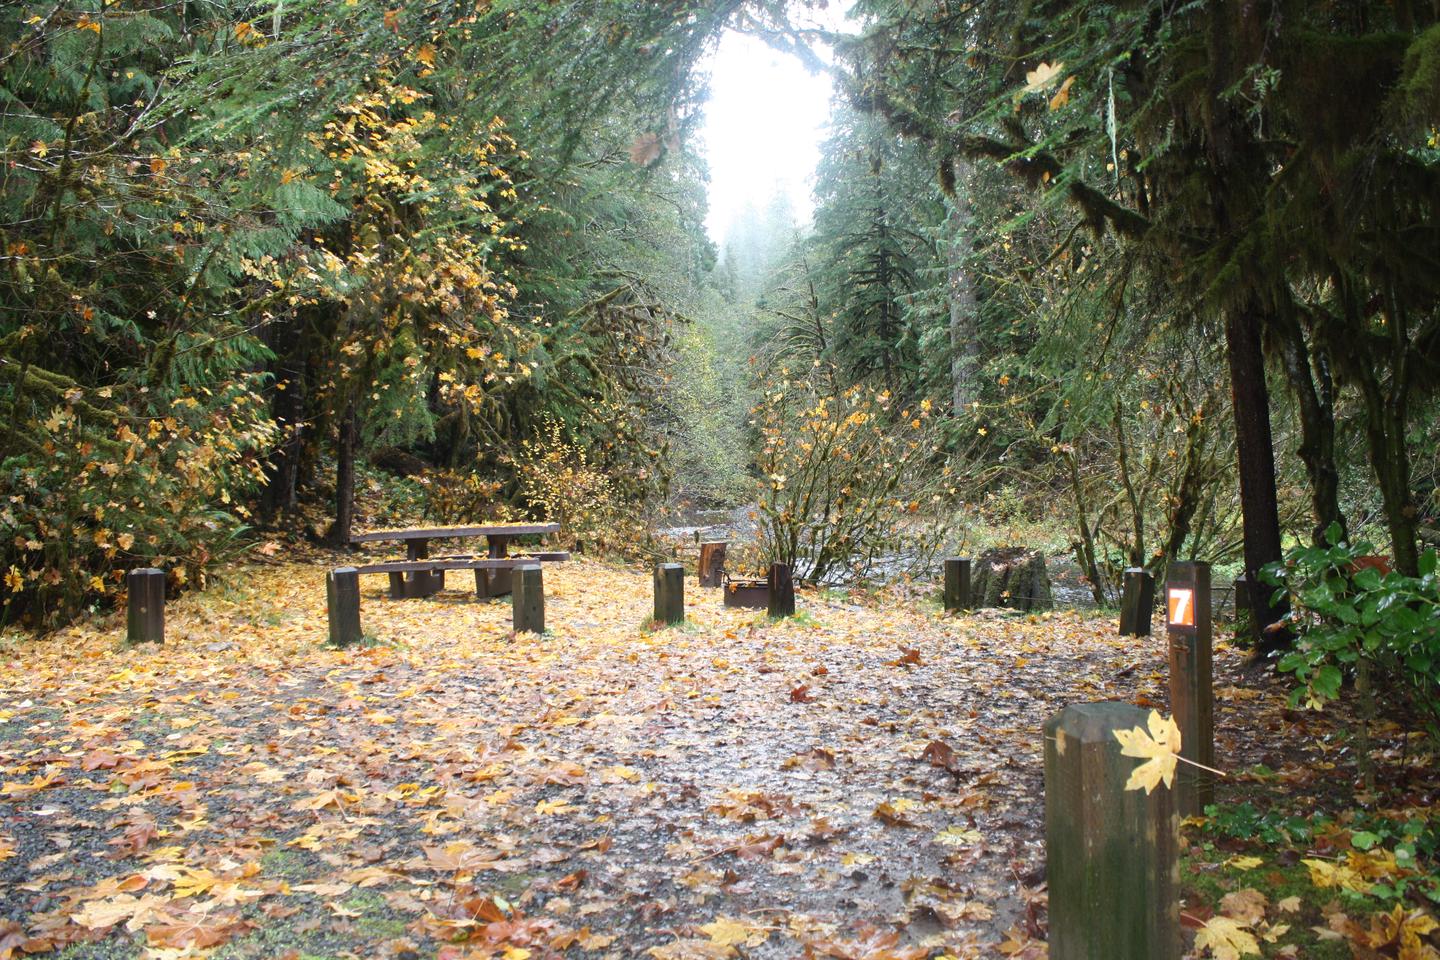 House Rock Campground located in the Willamette National Forest.House Rock - Site 7